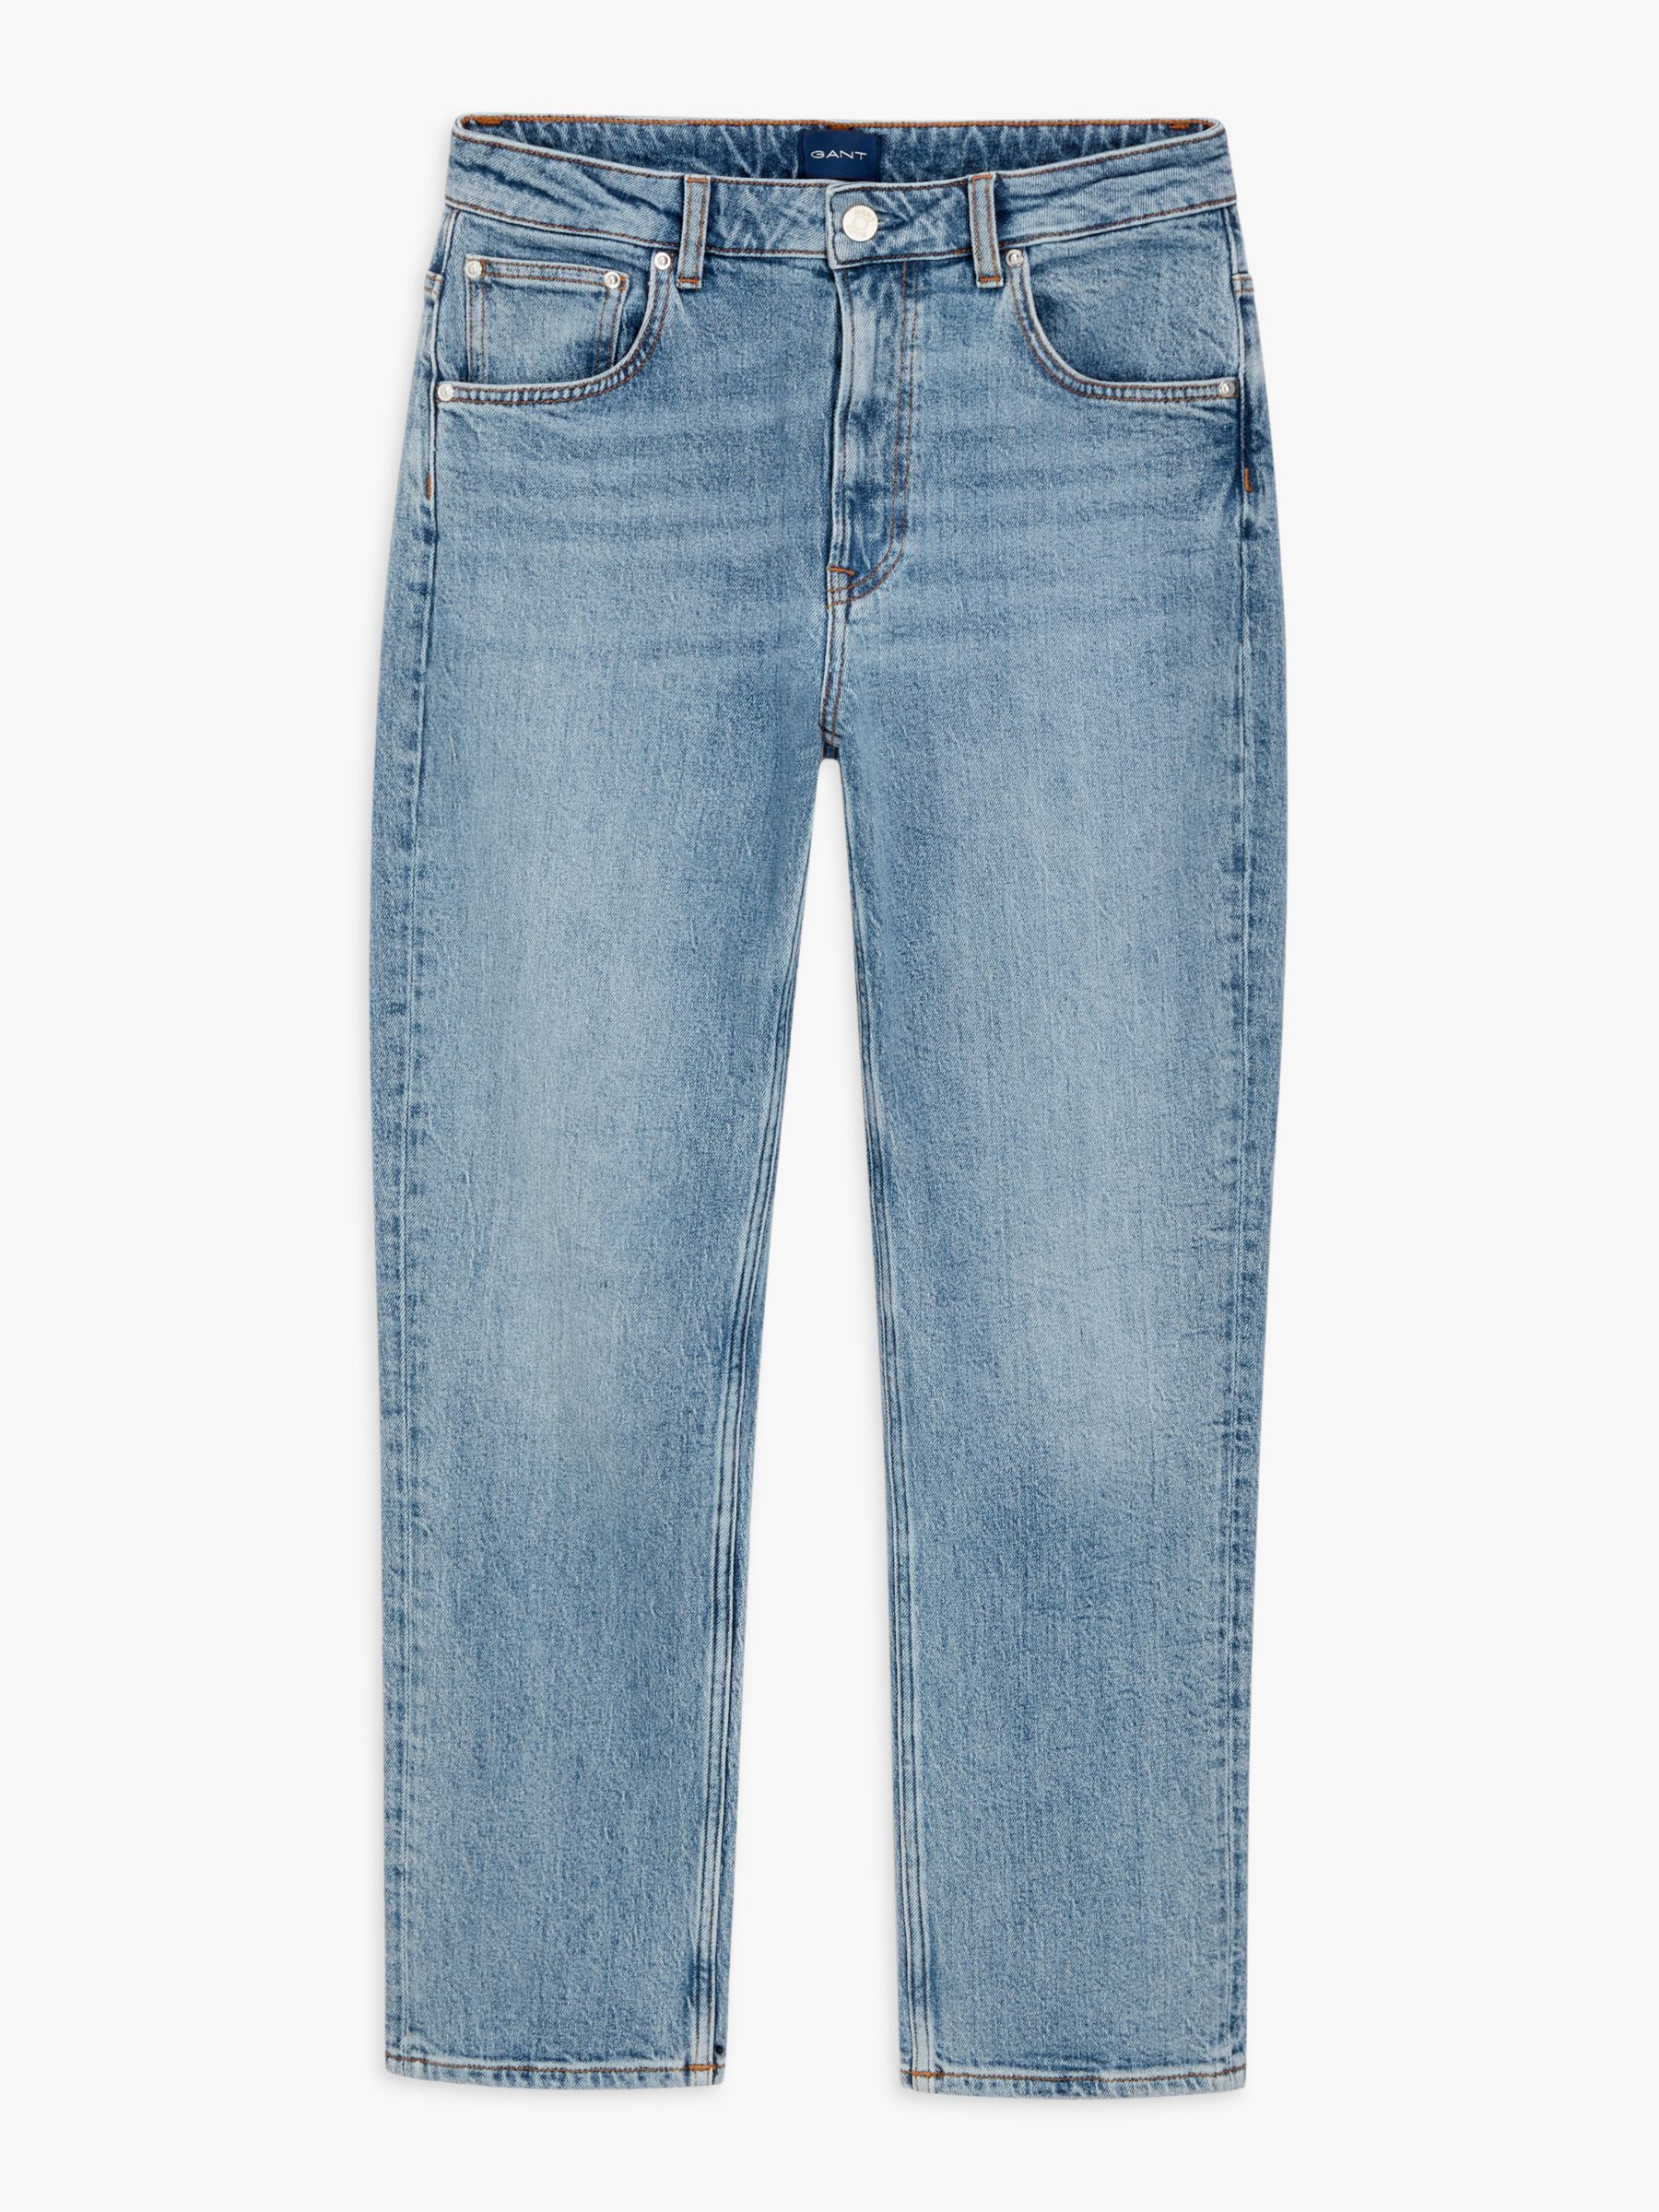 GANT High Waist Straight Cut Tapered Cropped Jeans, Mid Blue Vintage, 26